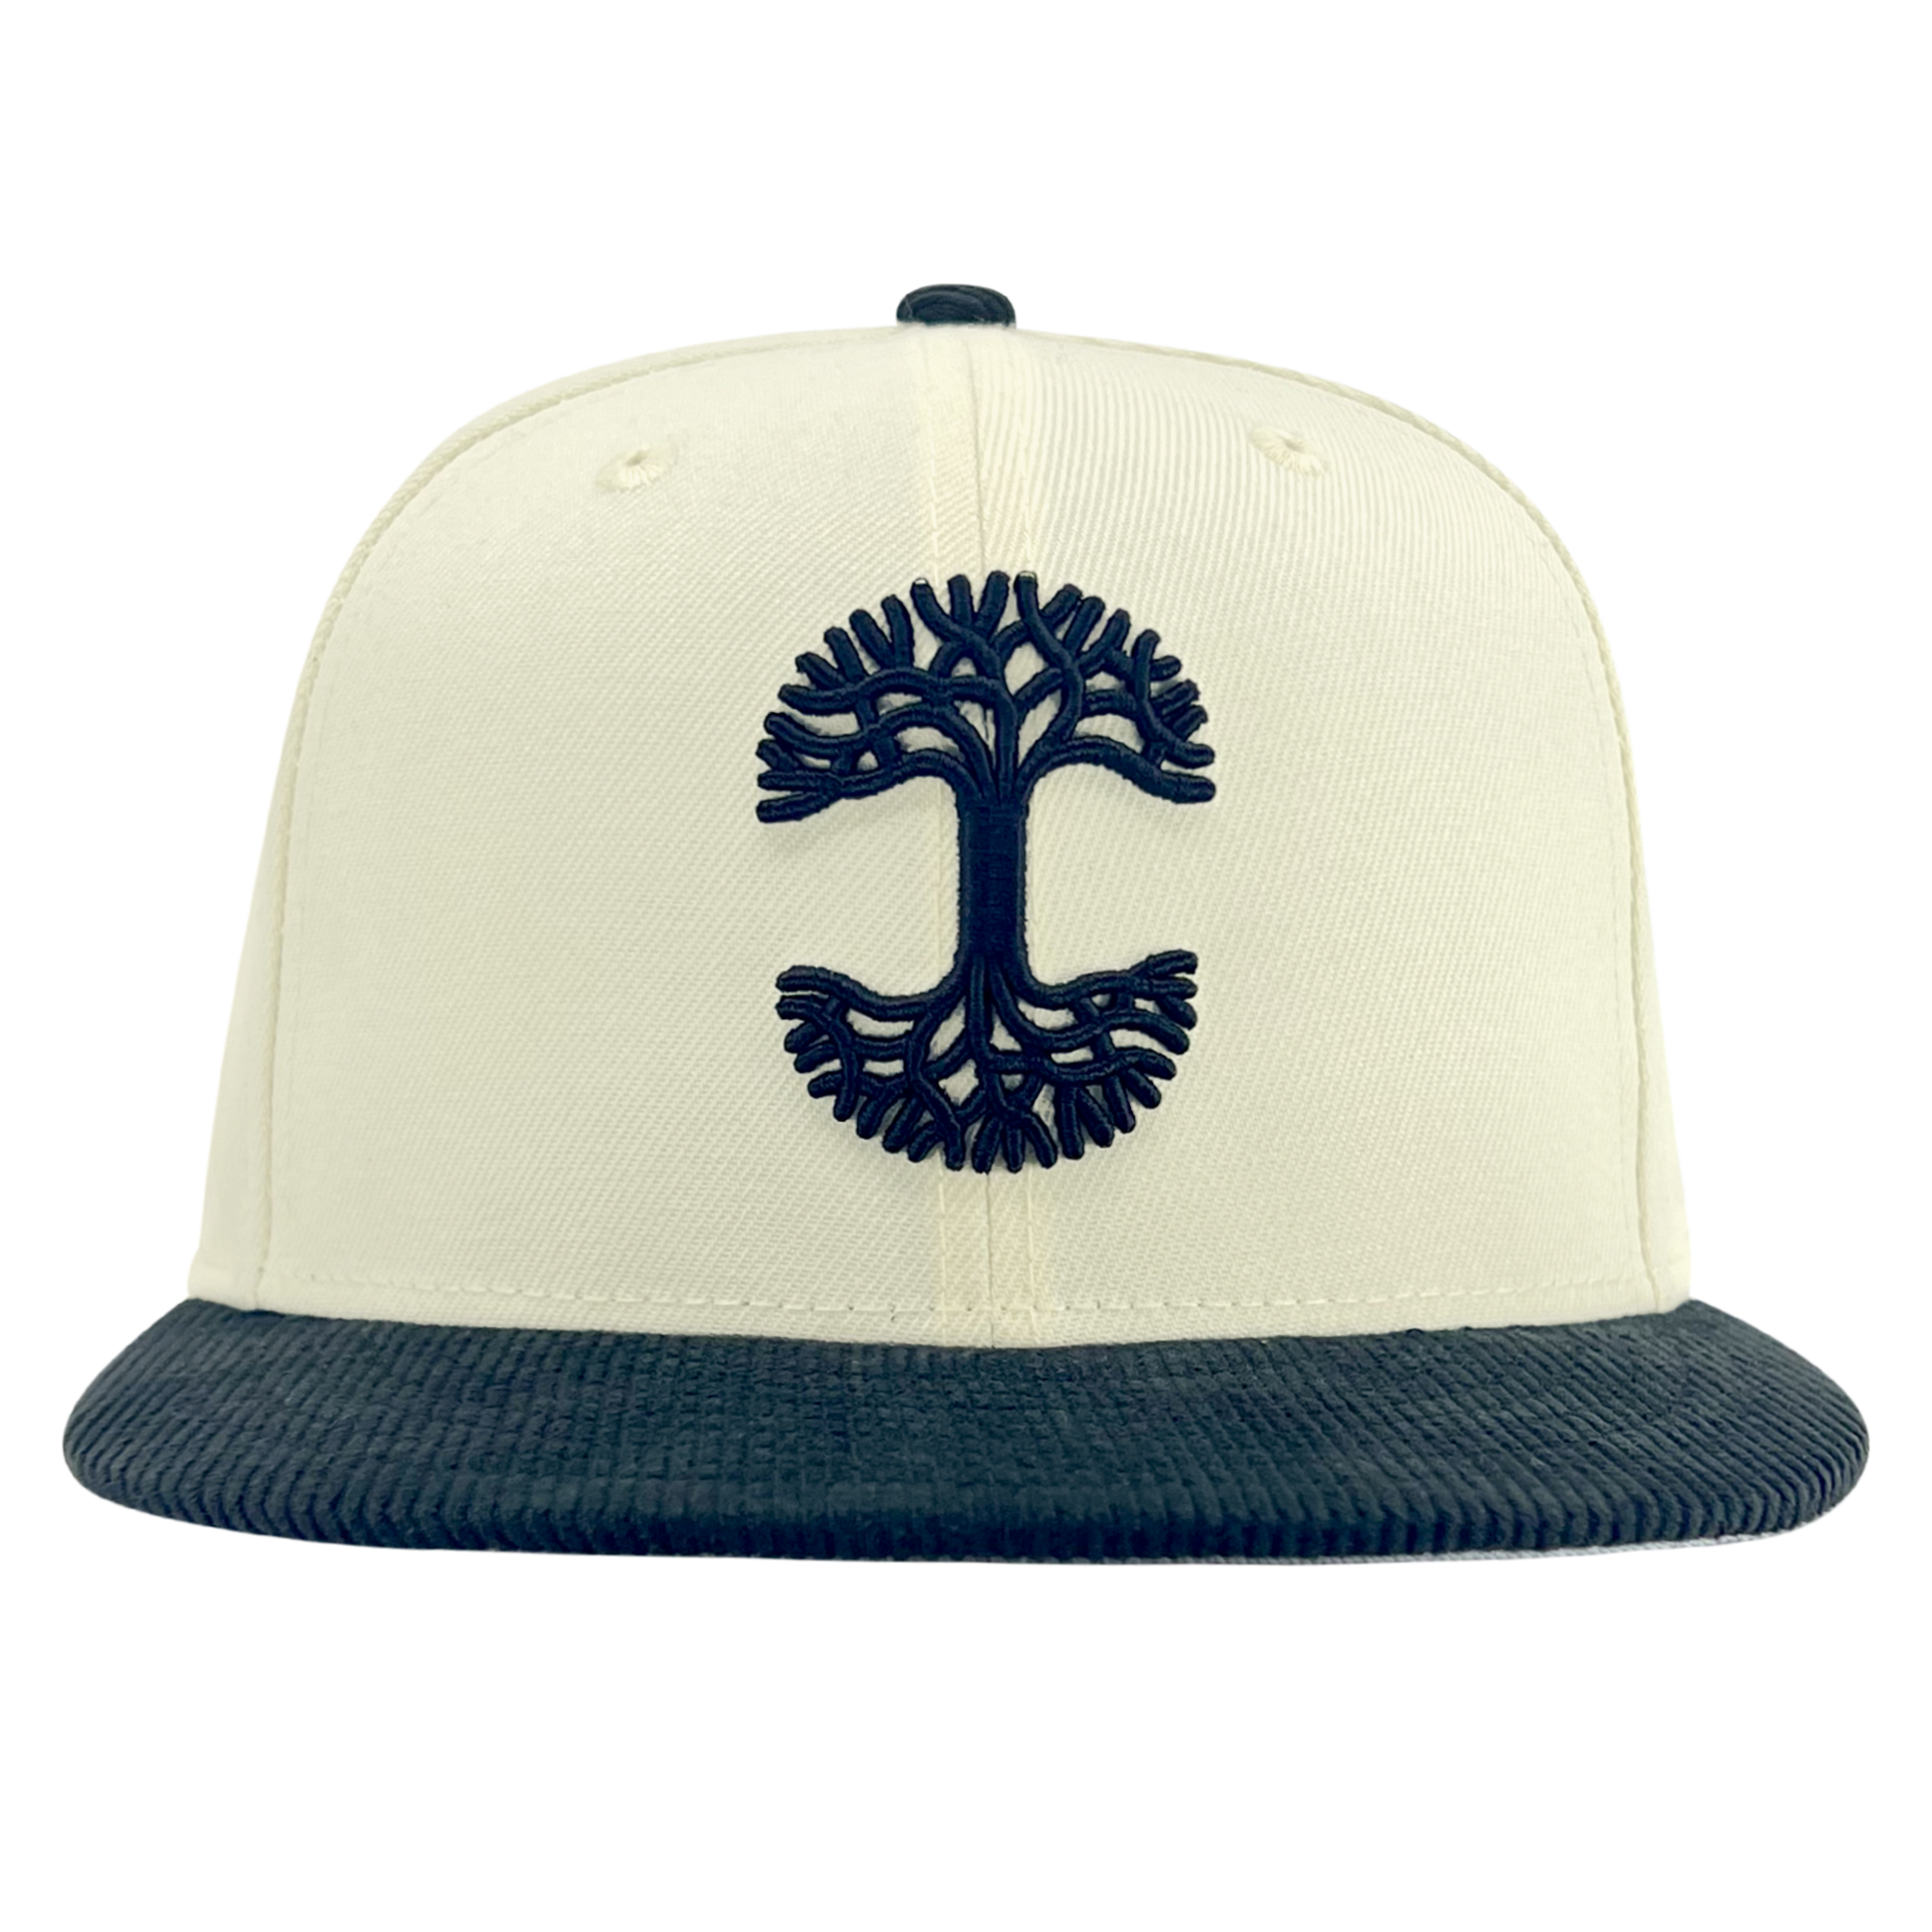 Fitted New Era 59FIFTY cap in chrome white, with a black corduroy brim and black embroidered Oaklandish tree logo.